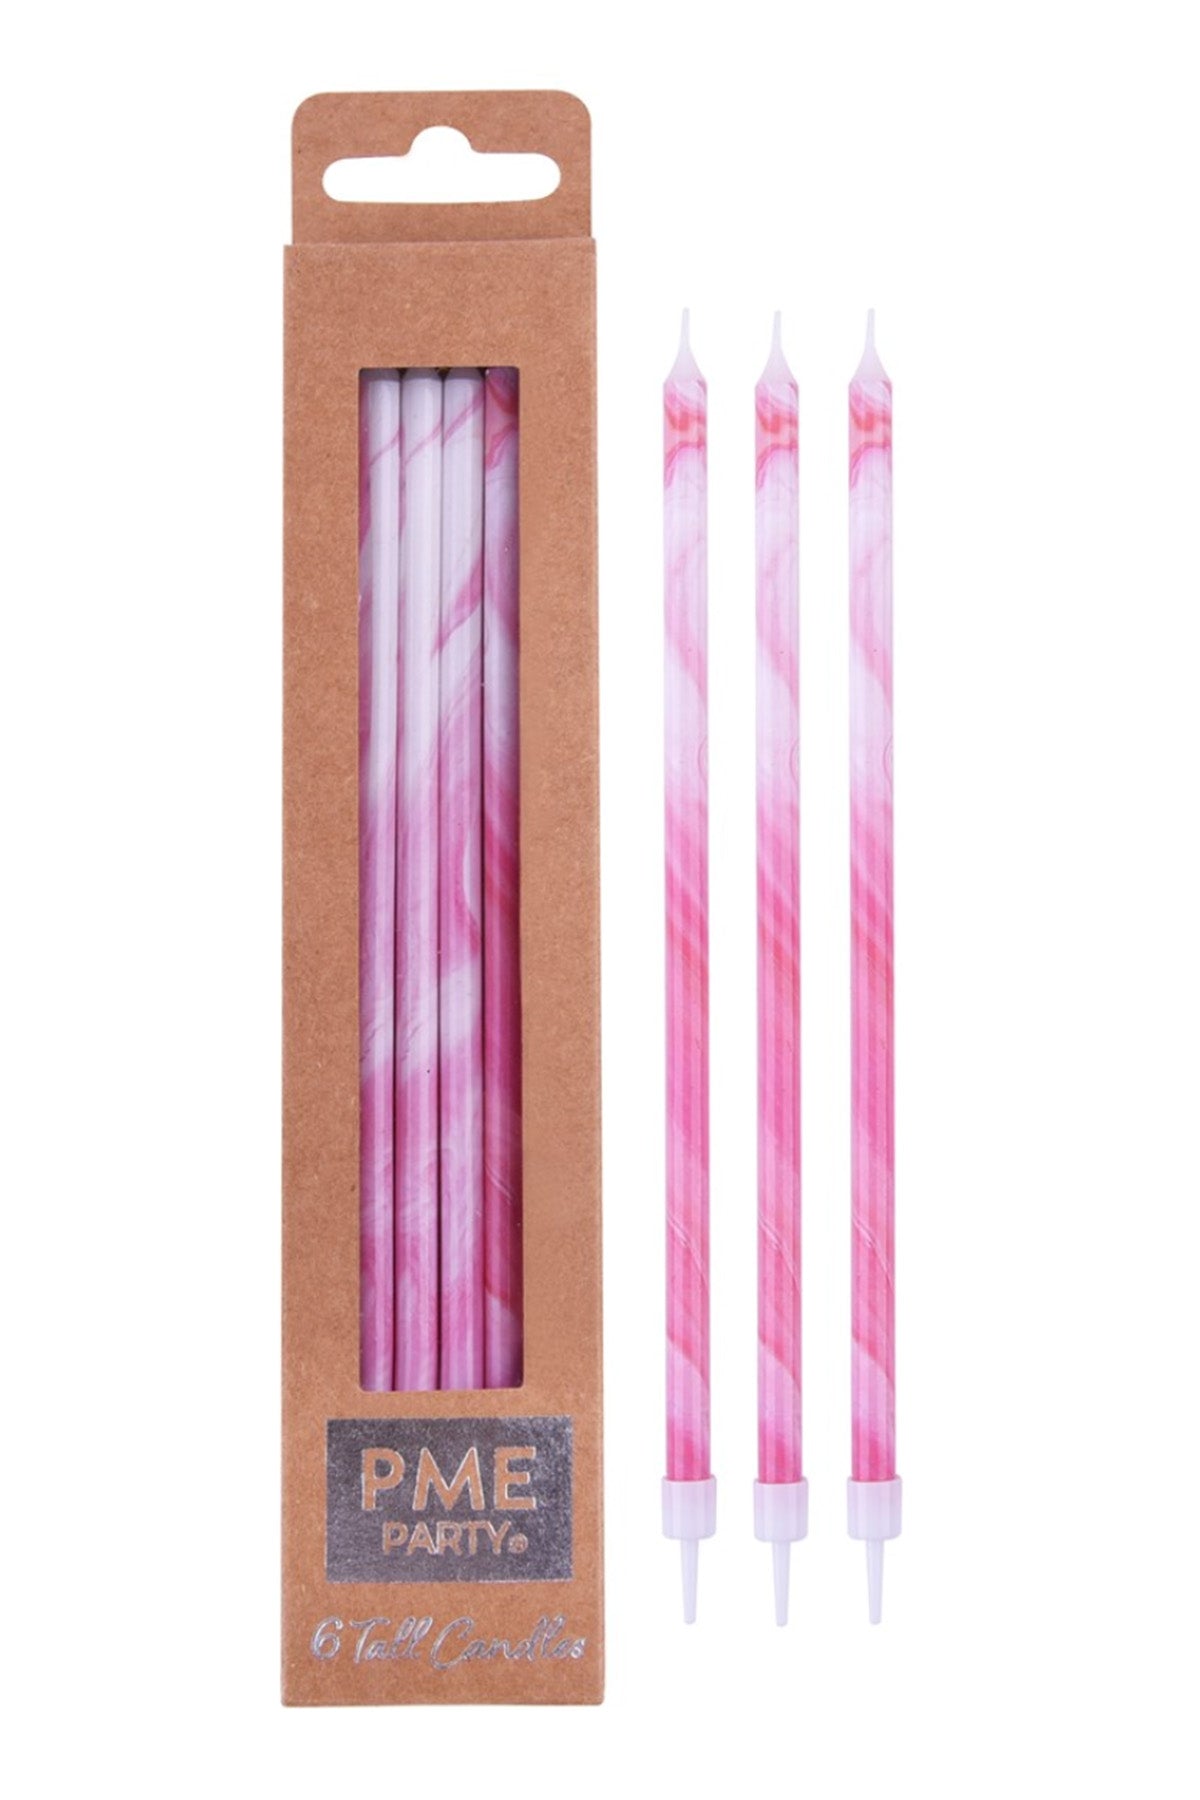 Candles - Pink Marble Extra Tall W/ Holders (7") - Pk/6 Birthday Candles PME 